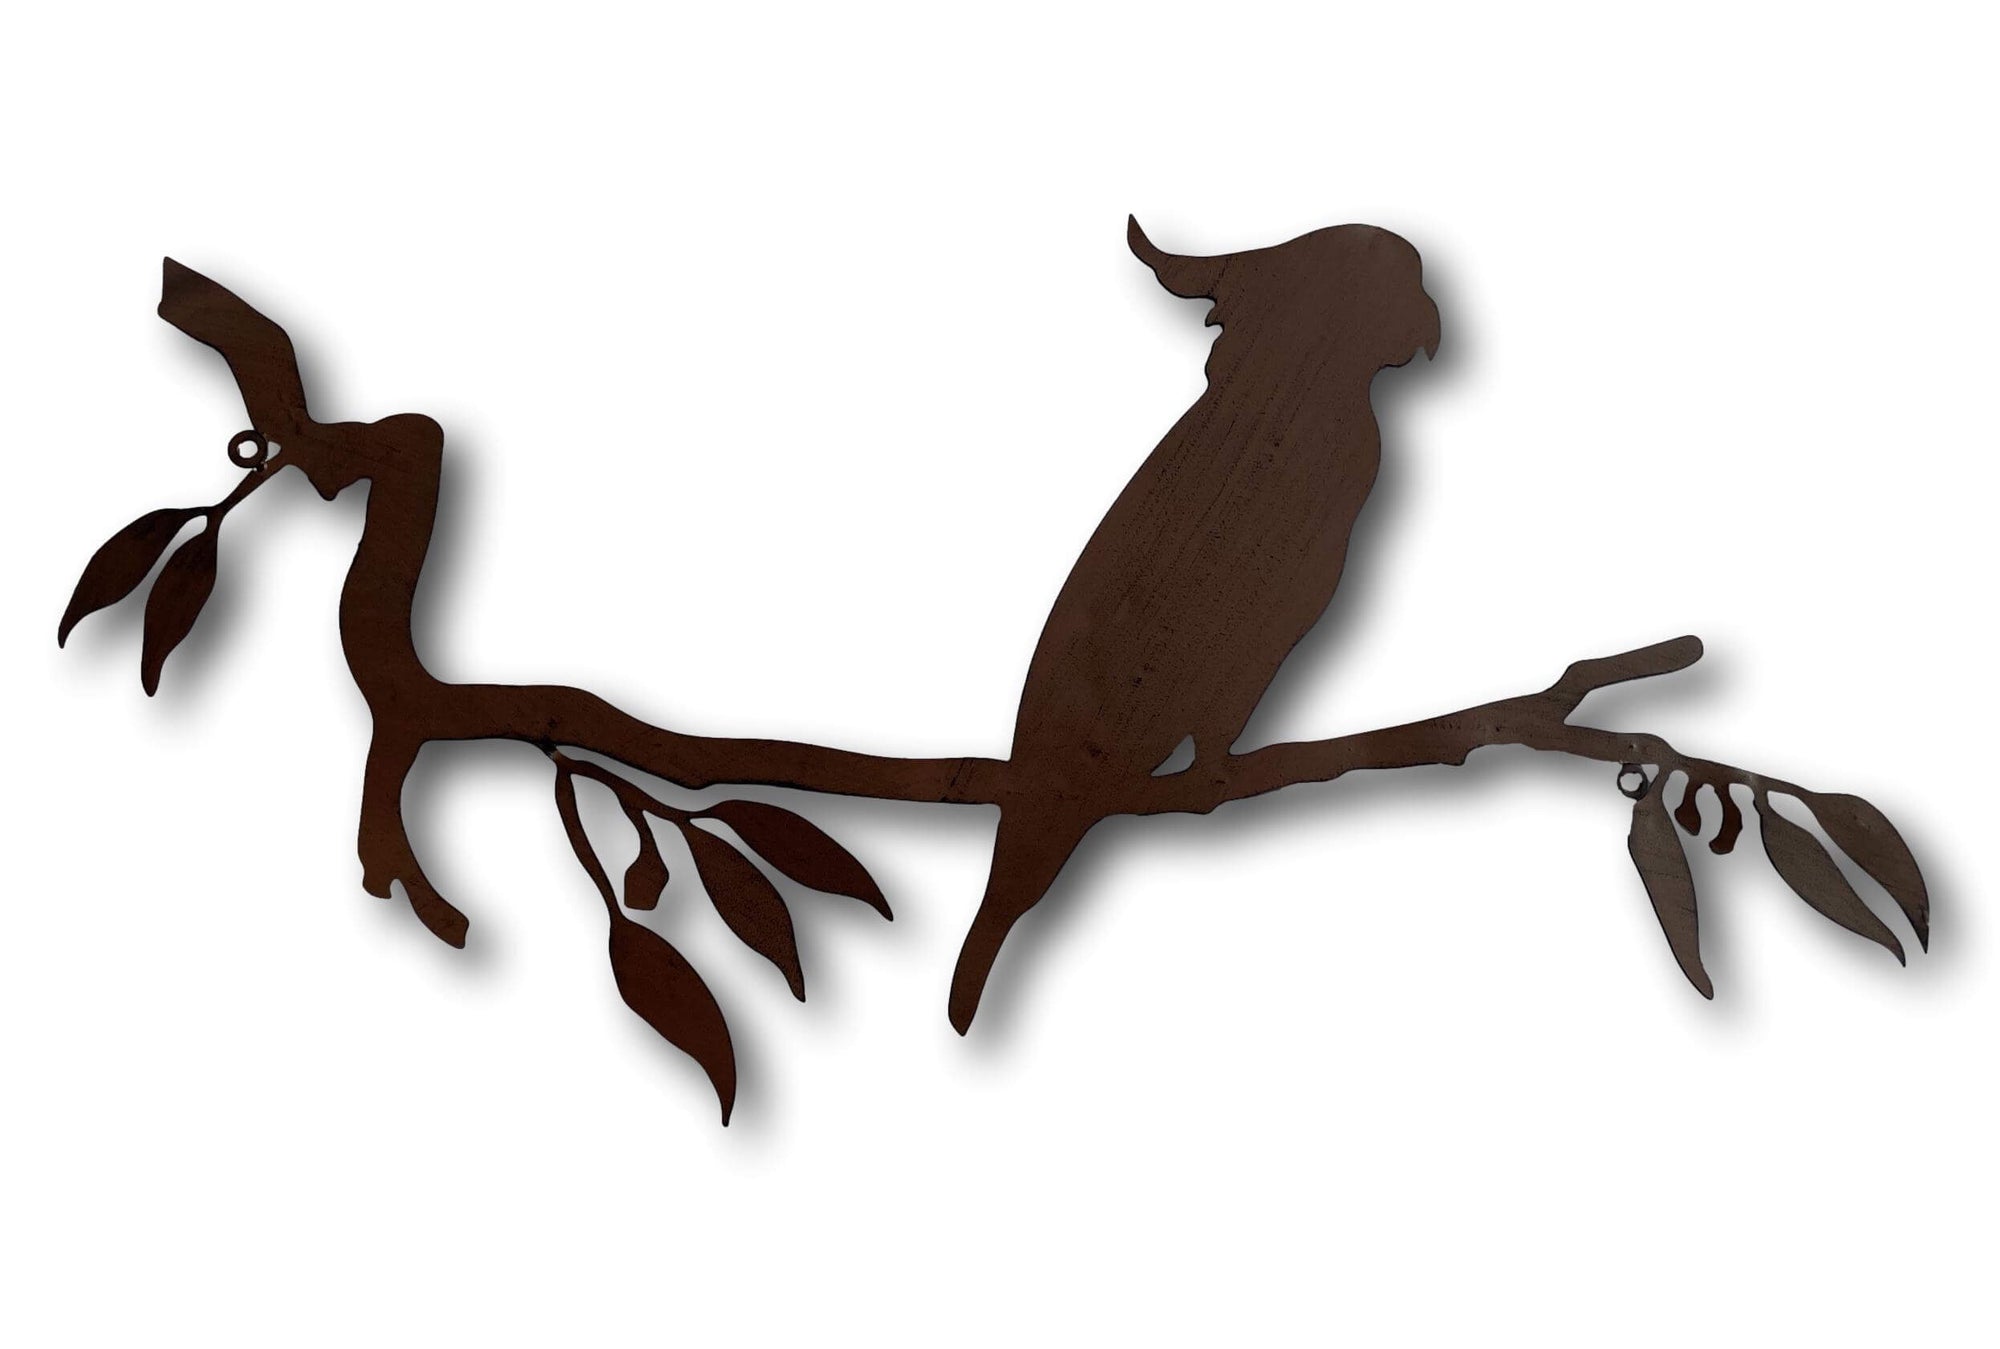 LARGE COCKATOO SILHOUETTE WALL ART - LASER CUT METAL ART + SINGING BOWLS AND MEDITATION